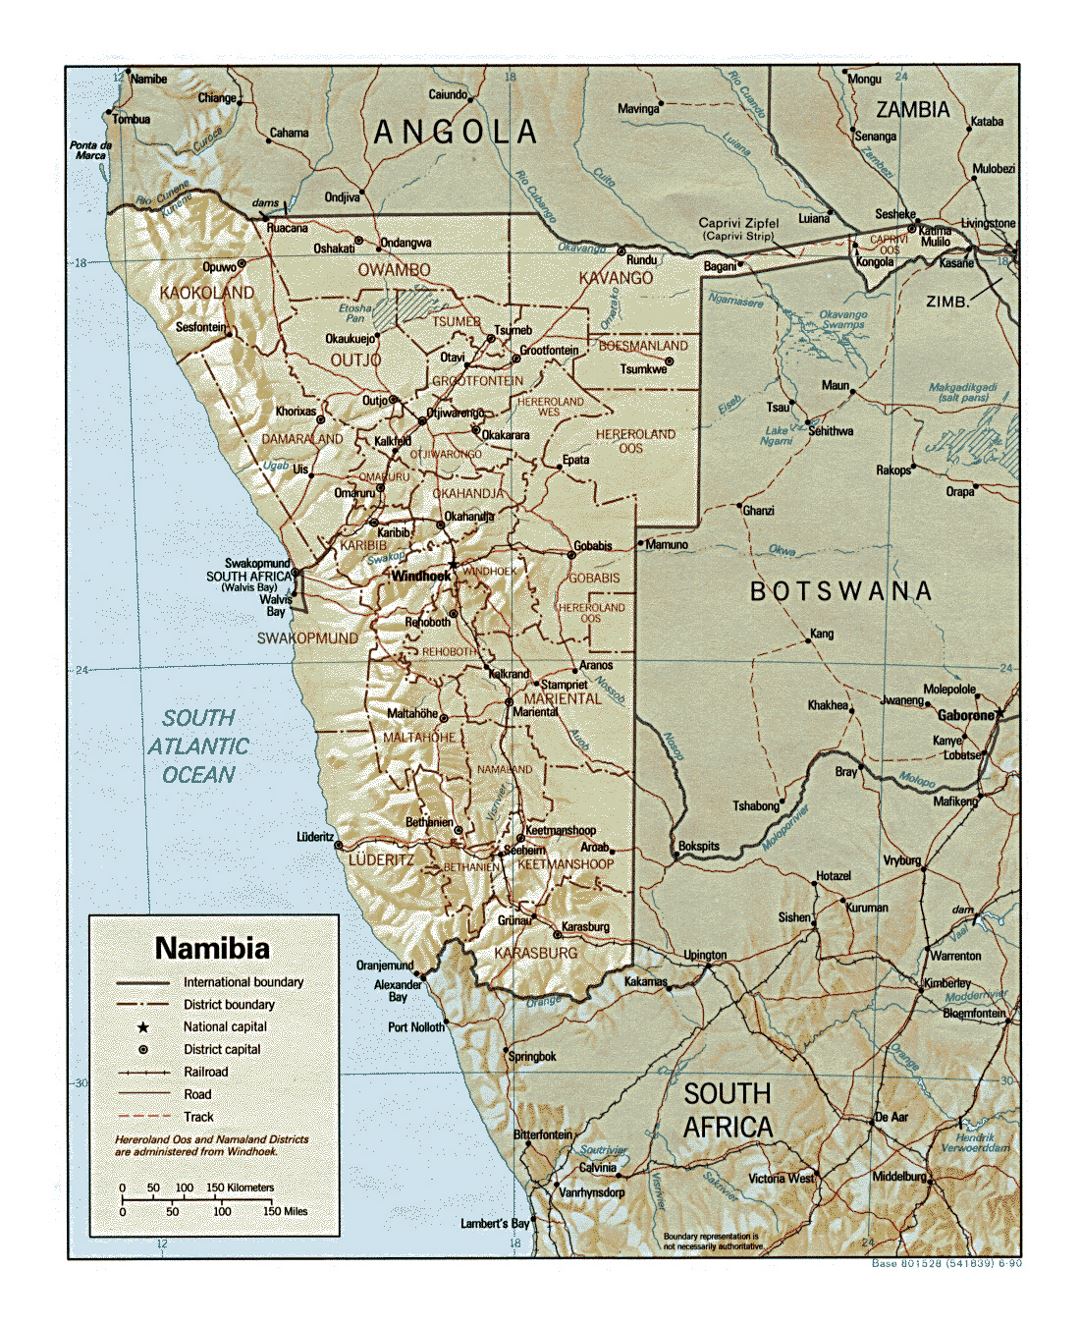 Detailed political and administrative map of Namibia with relief, roads, railroads and major cities - 1990